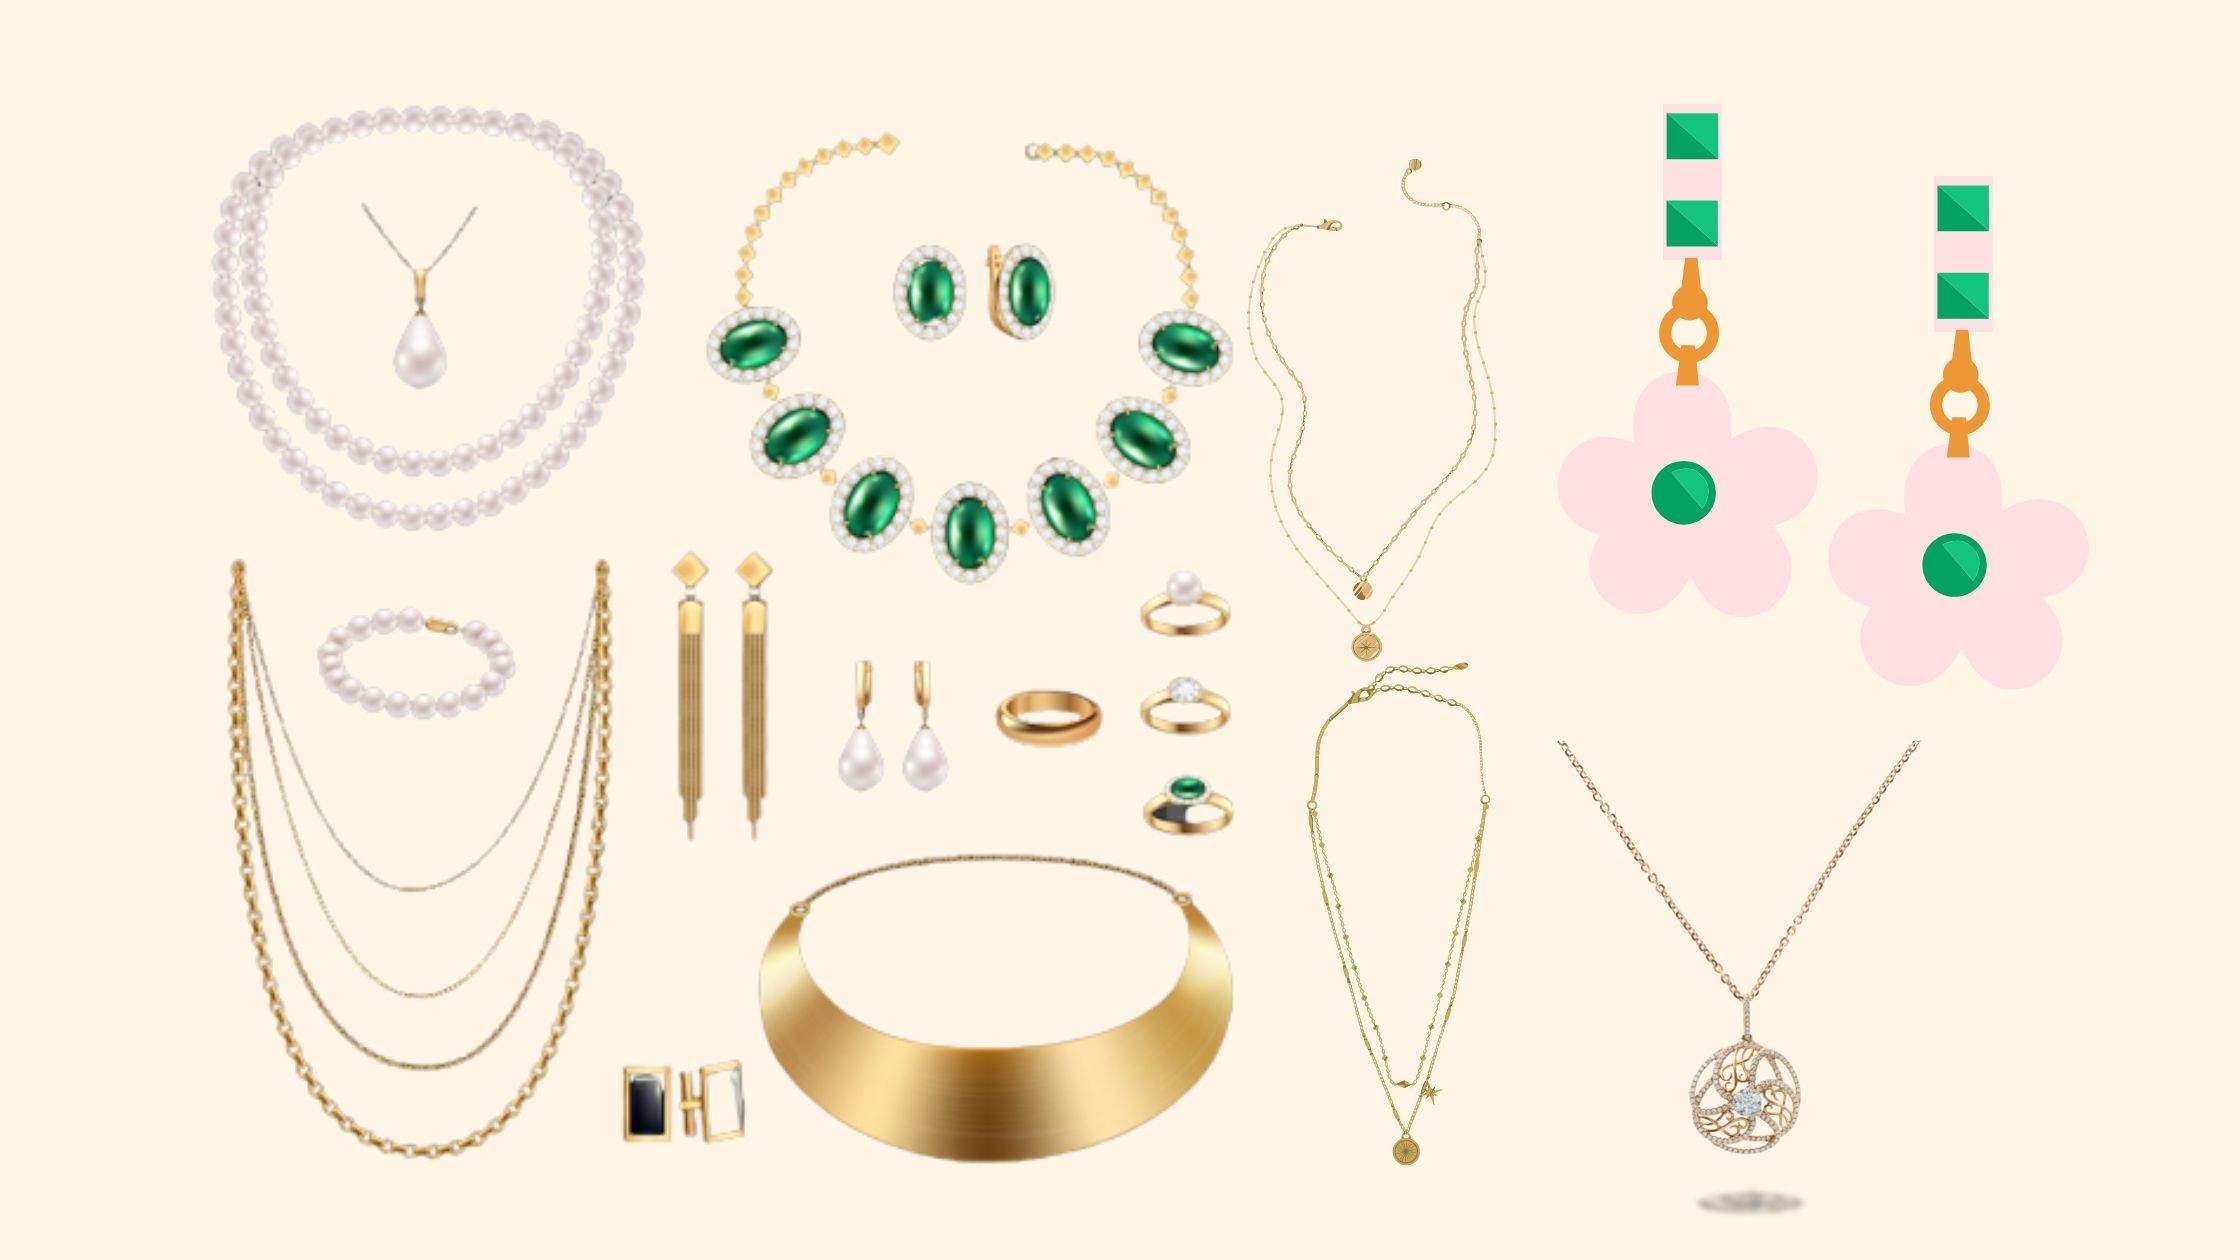 Some Important Points to Keep in Mind While Buying Jewelry